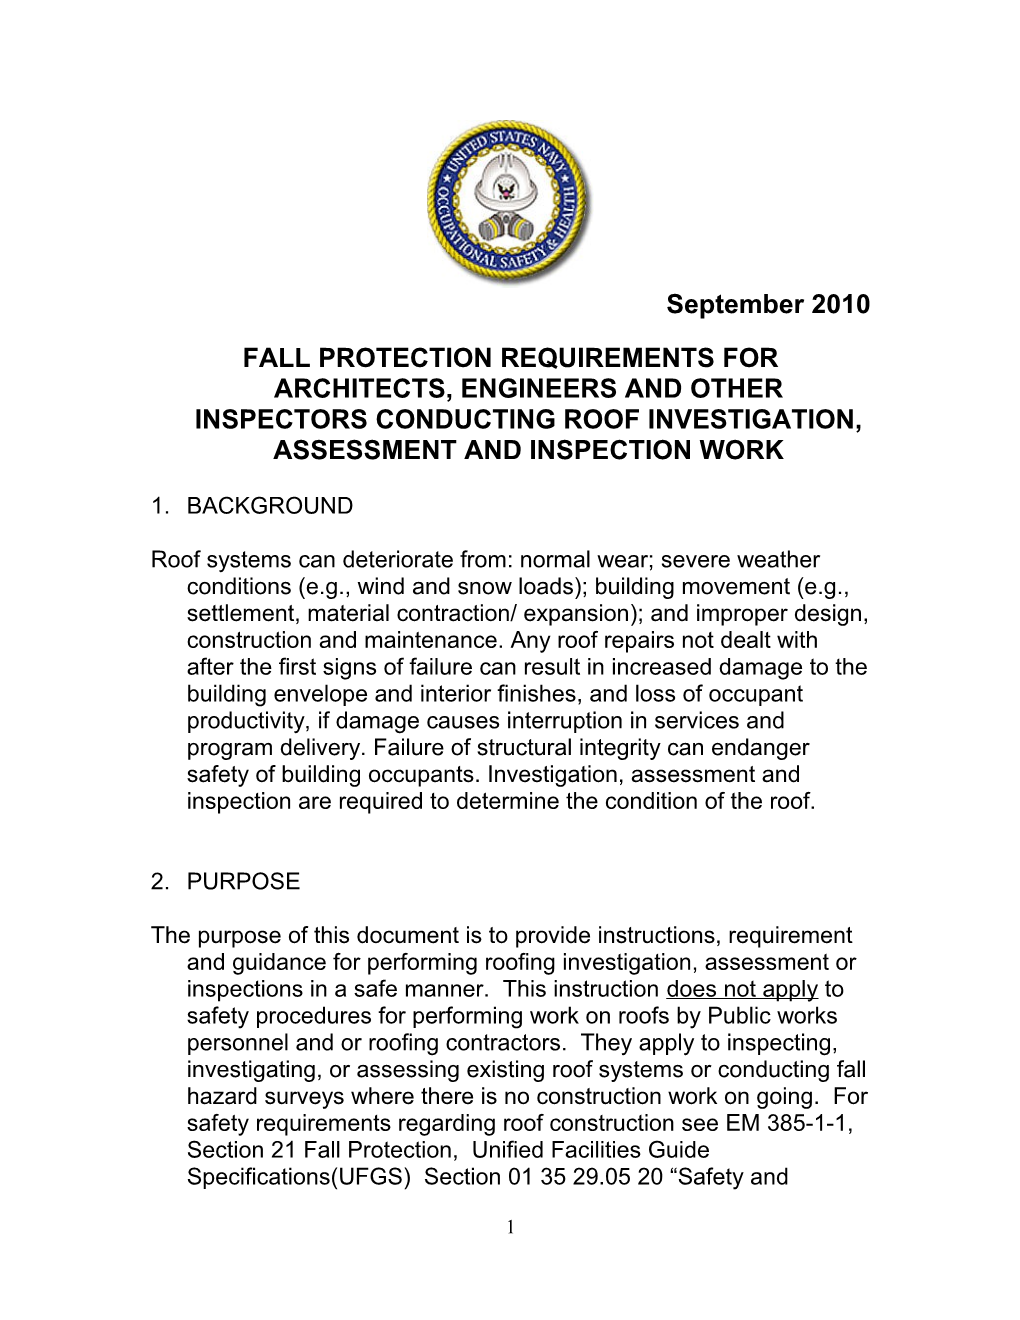 Fall Protection Requirements for Architects, Engineers and Other Inspectors Conducting